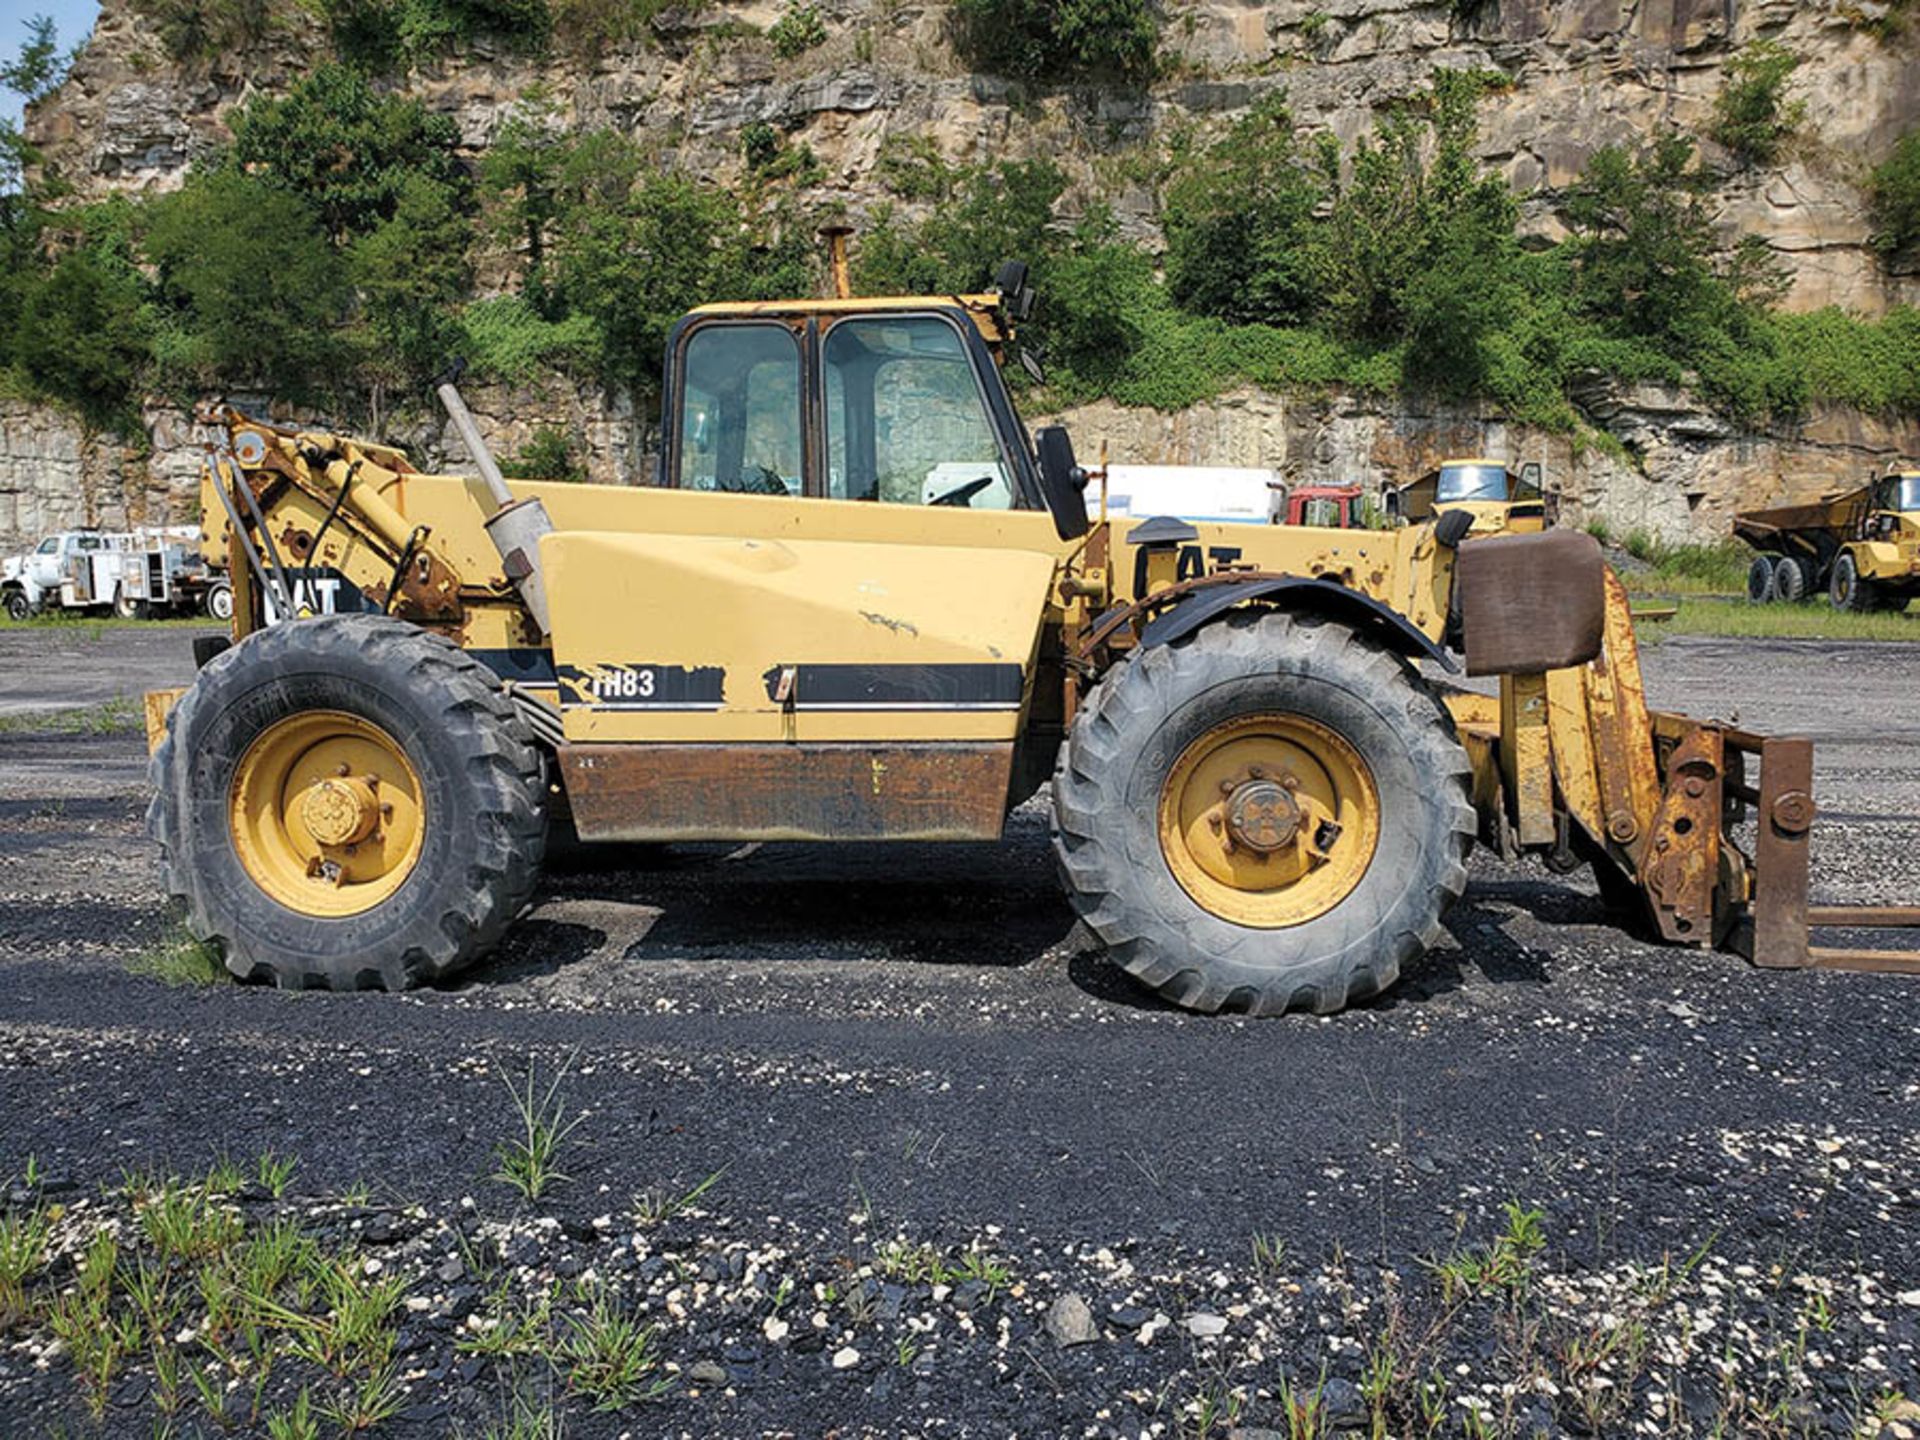 CATERPILLAR TH83 TELEHANDLER, S/N: 3RN02074, 13,346 HOURS SHOWING, 8000 LB CAPACITY, 14.00-24 TIRES, - Image 4 of 8